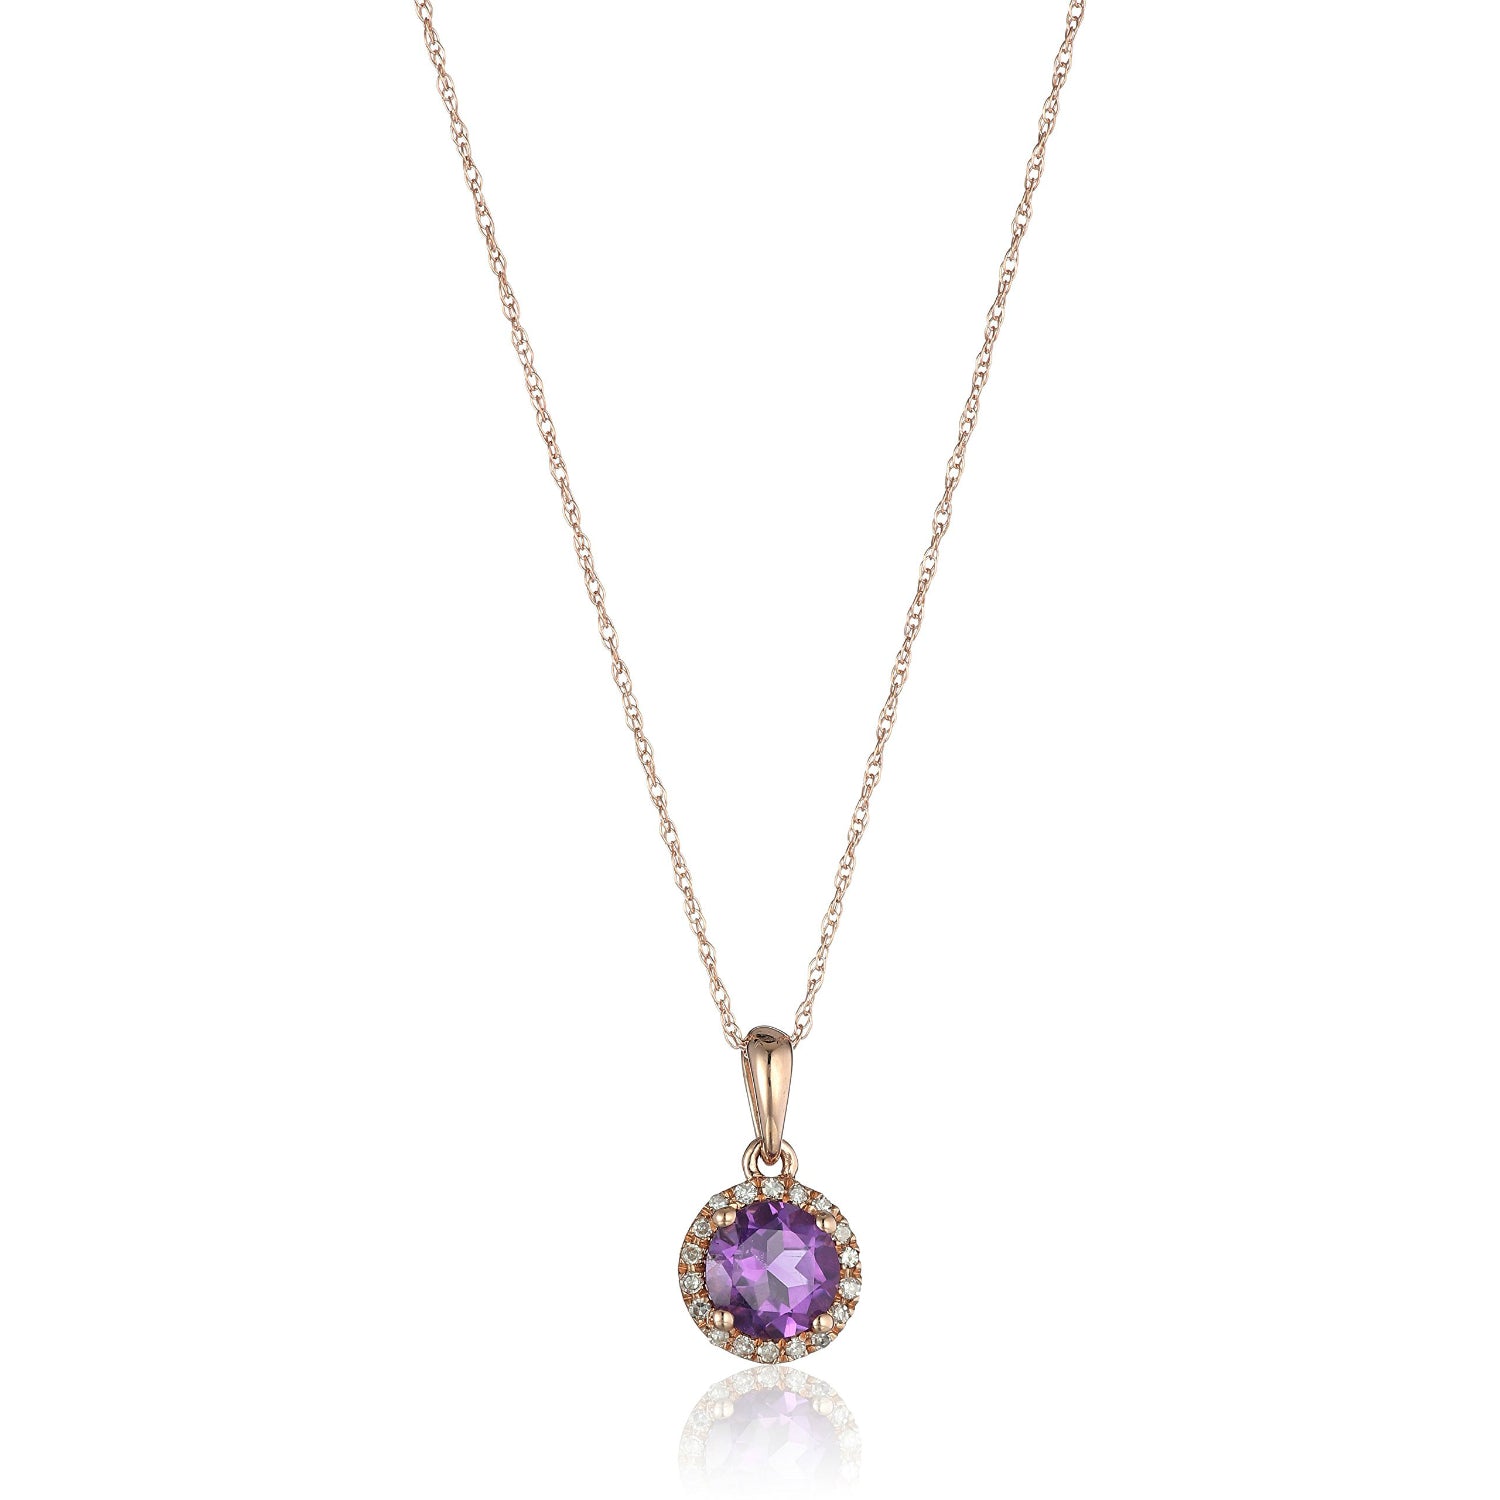 10k Rose Gold African Amethyst and Diamond Classic Pendant Necklace, 18" - Pinctore